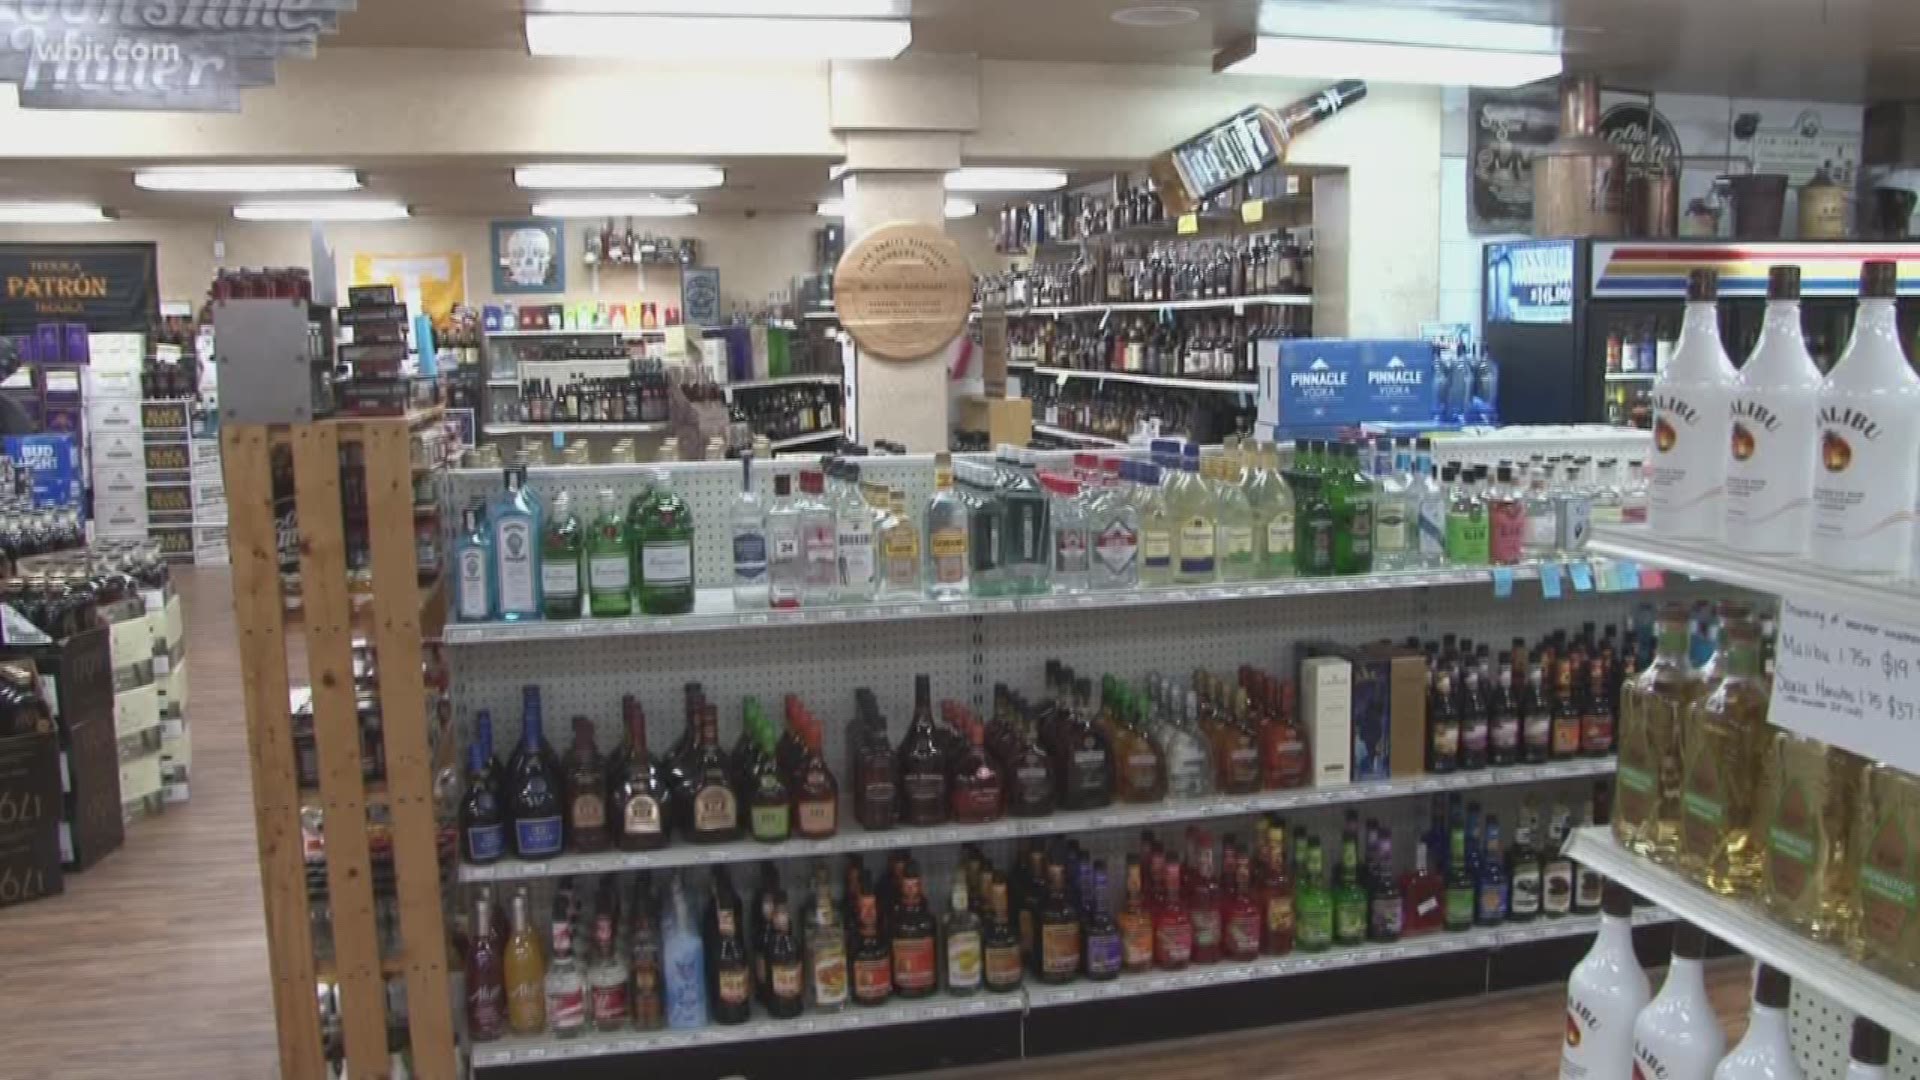 Jan. 24, 2018: Tennessee lawmakers are considering a bill to allow liquor and wine sales on Sundays. Package store owners are split on the idea.